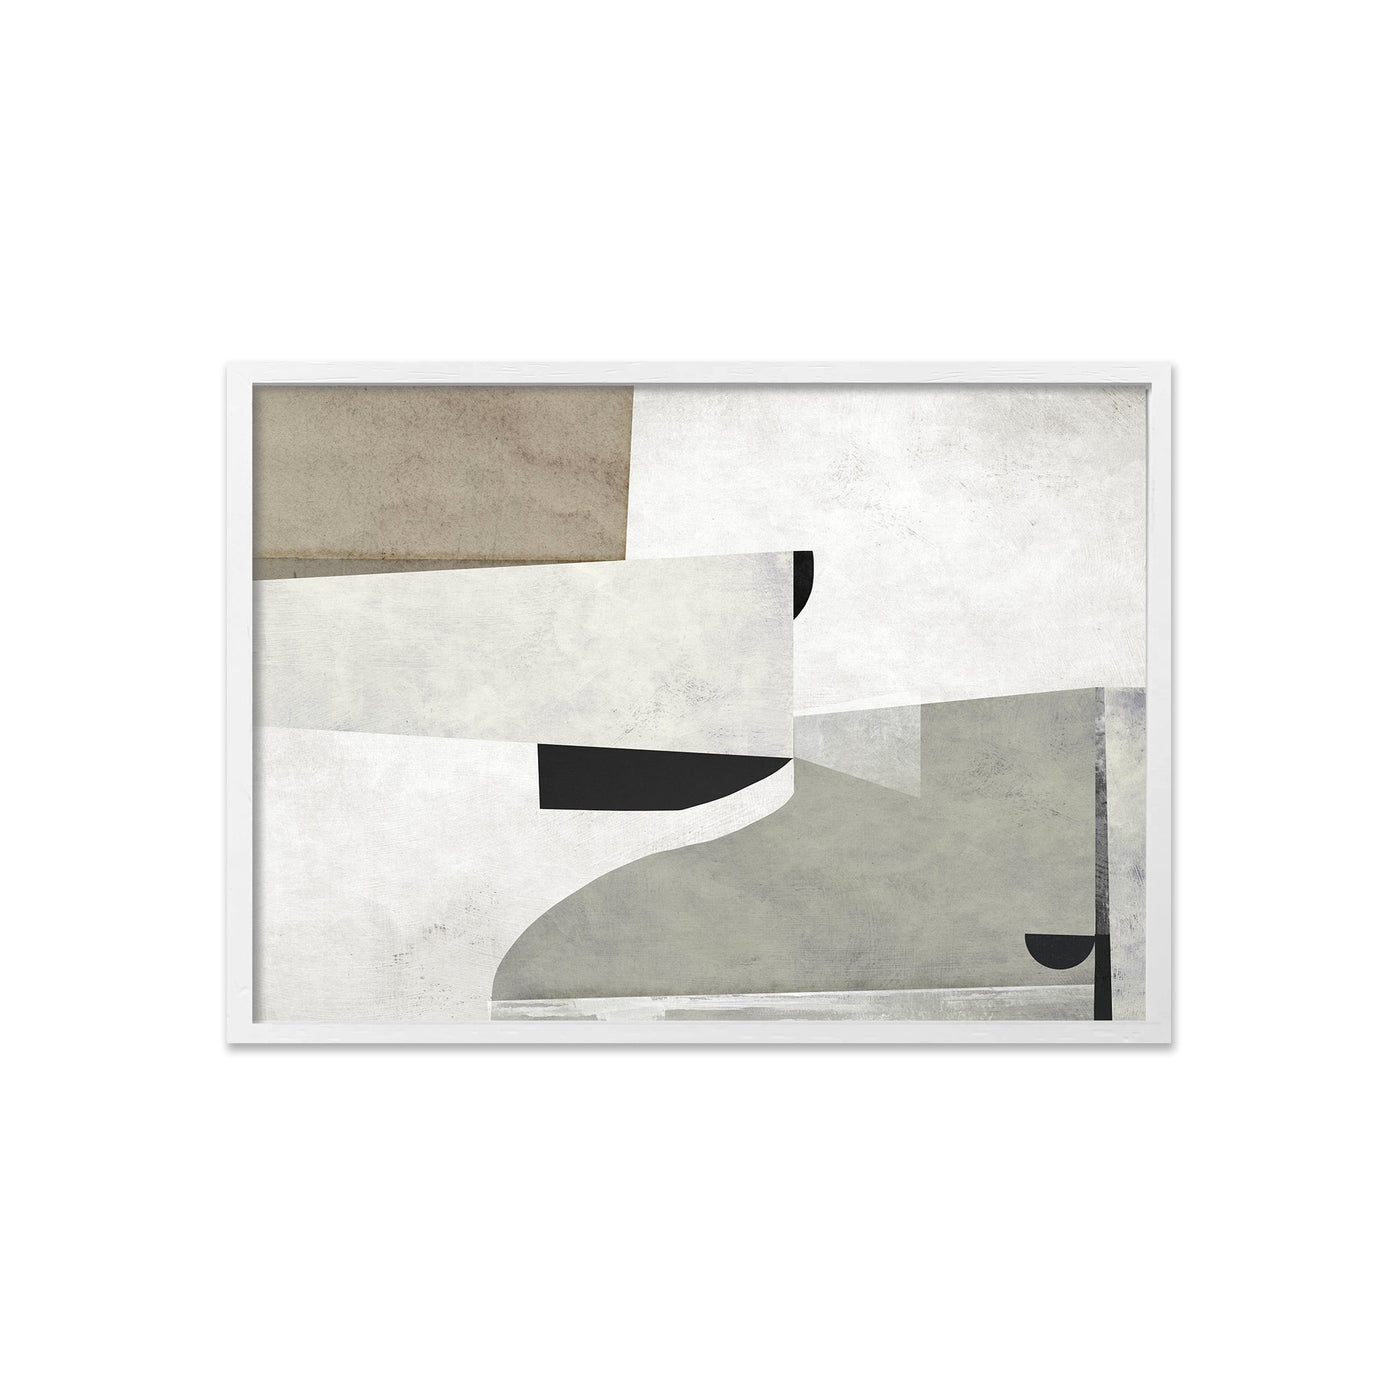 WALL ART | PRIORY ABSTRACT